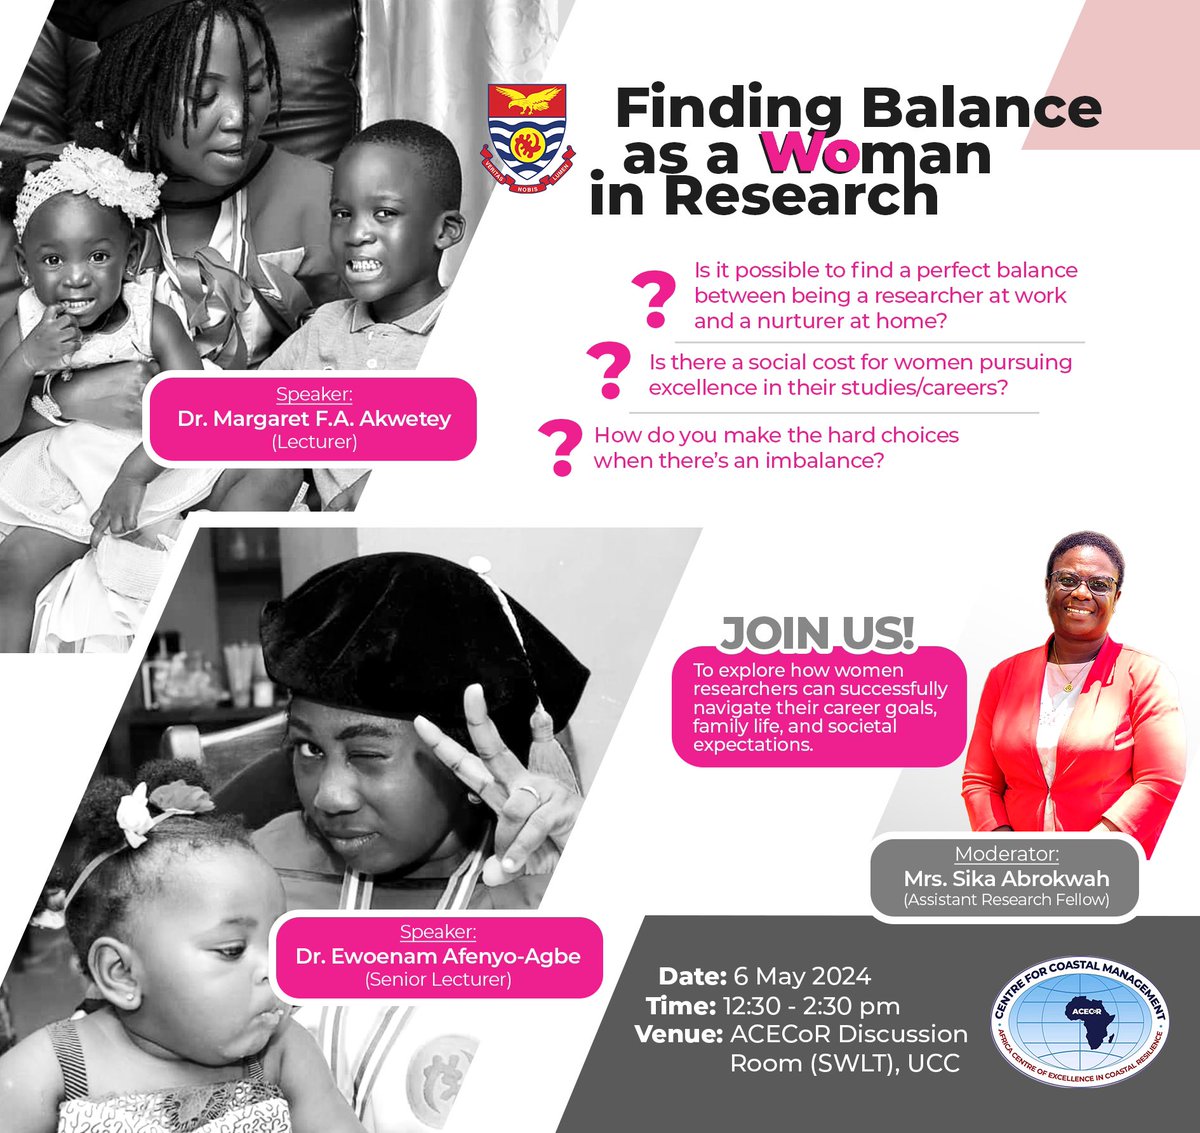 JOIN US! For an exciting discussion on the topic 'Finding Balance as a Woman in Research'. Happening on 6 May 2024.